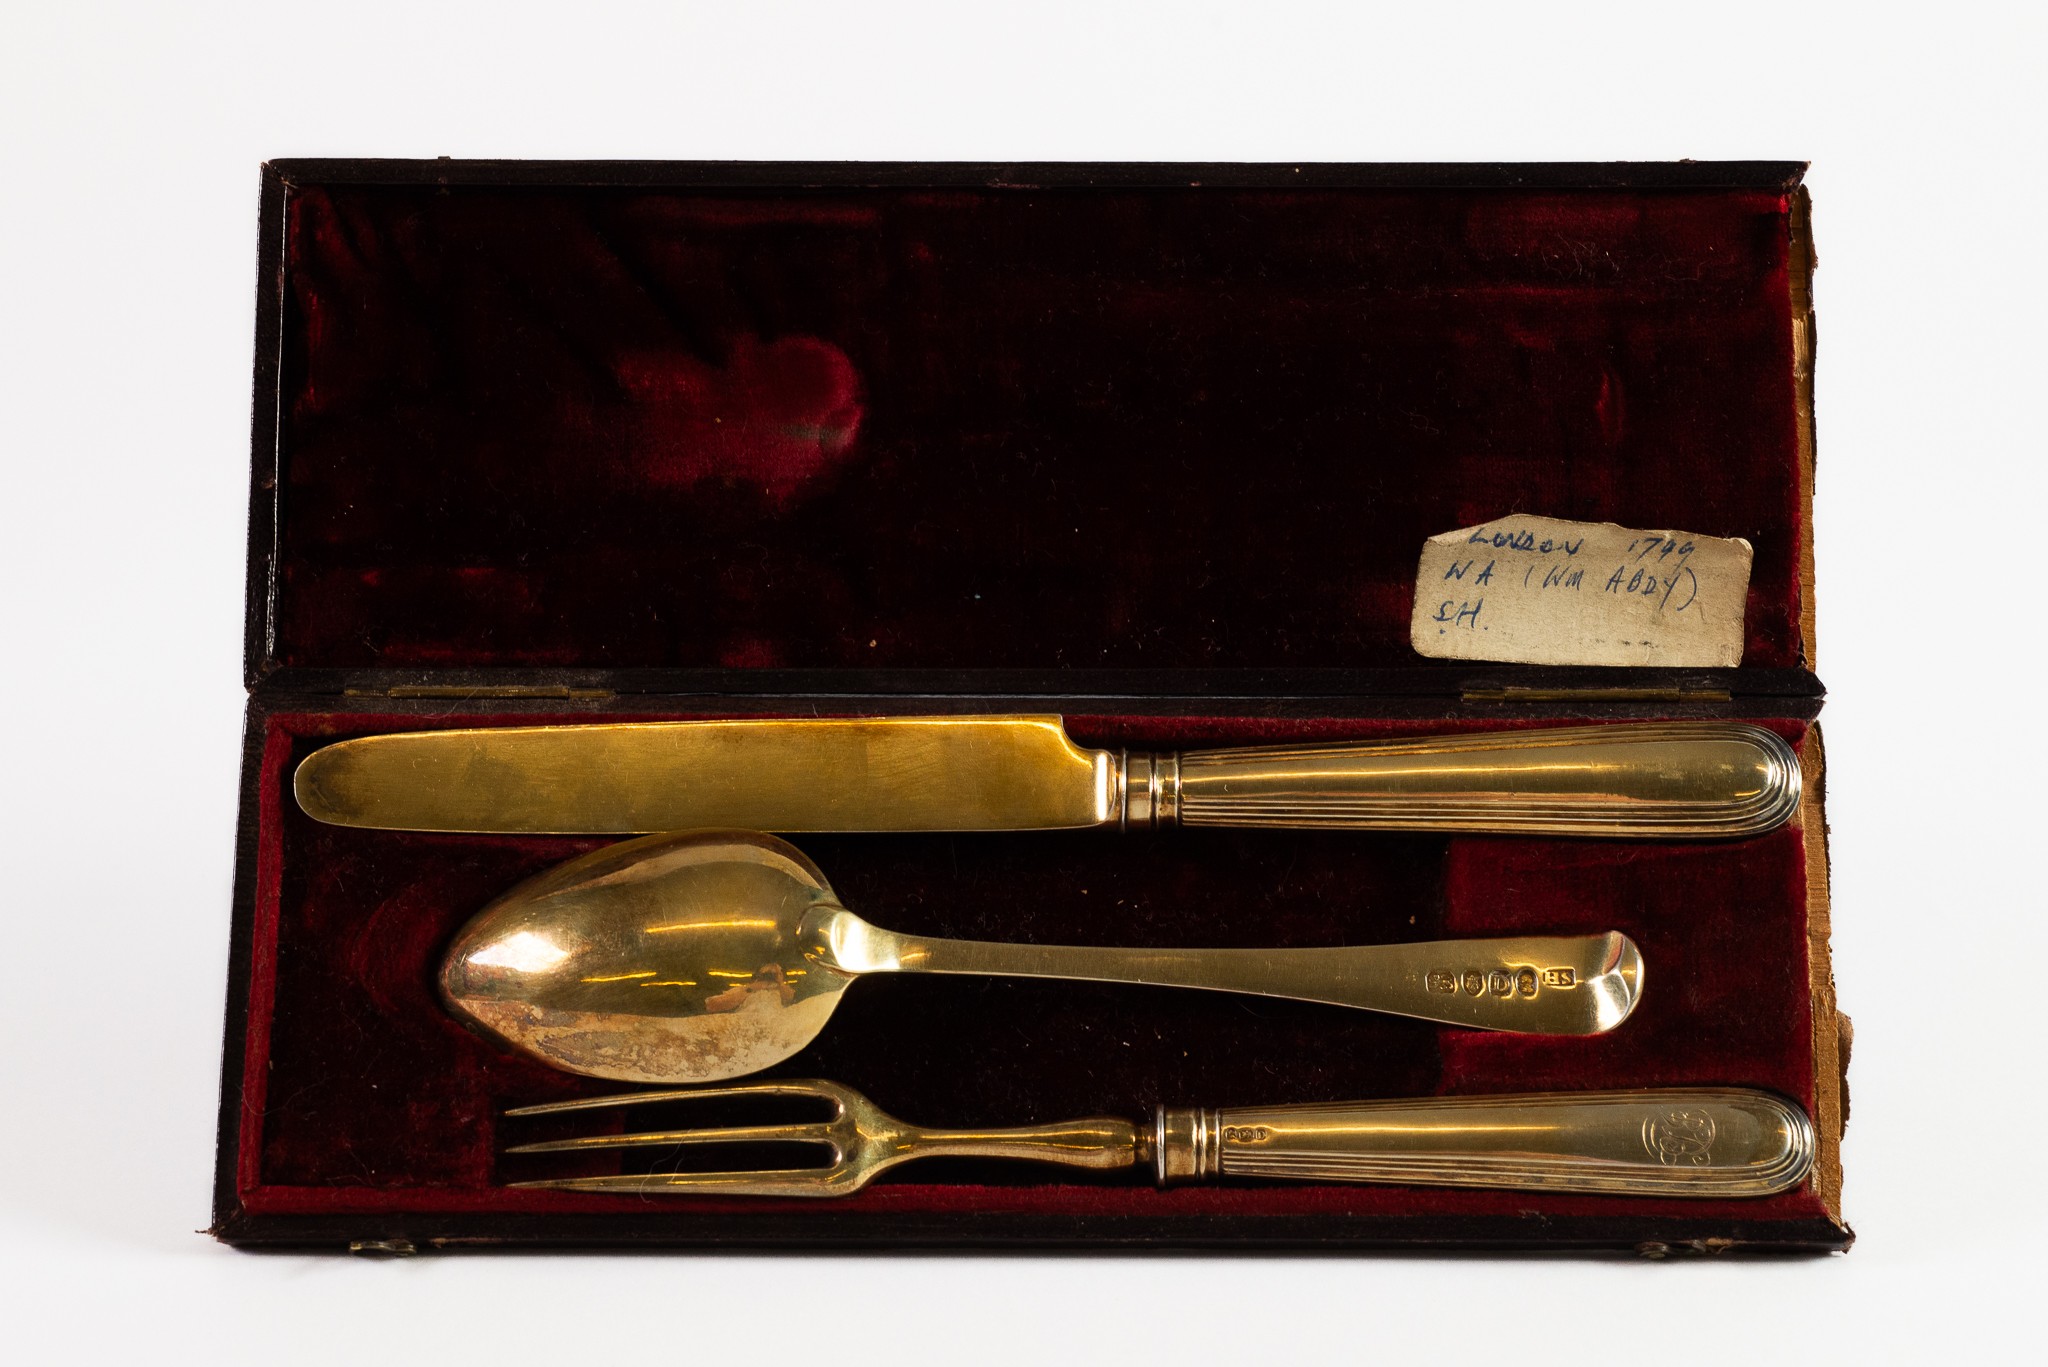 GEORGE III CASED THREE PIECE SILVER GILT CHILD’S CUTLERY SET, the fork and knife with filled